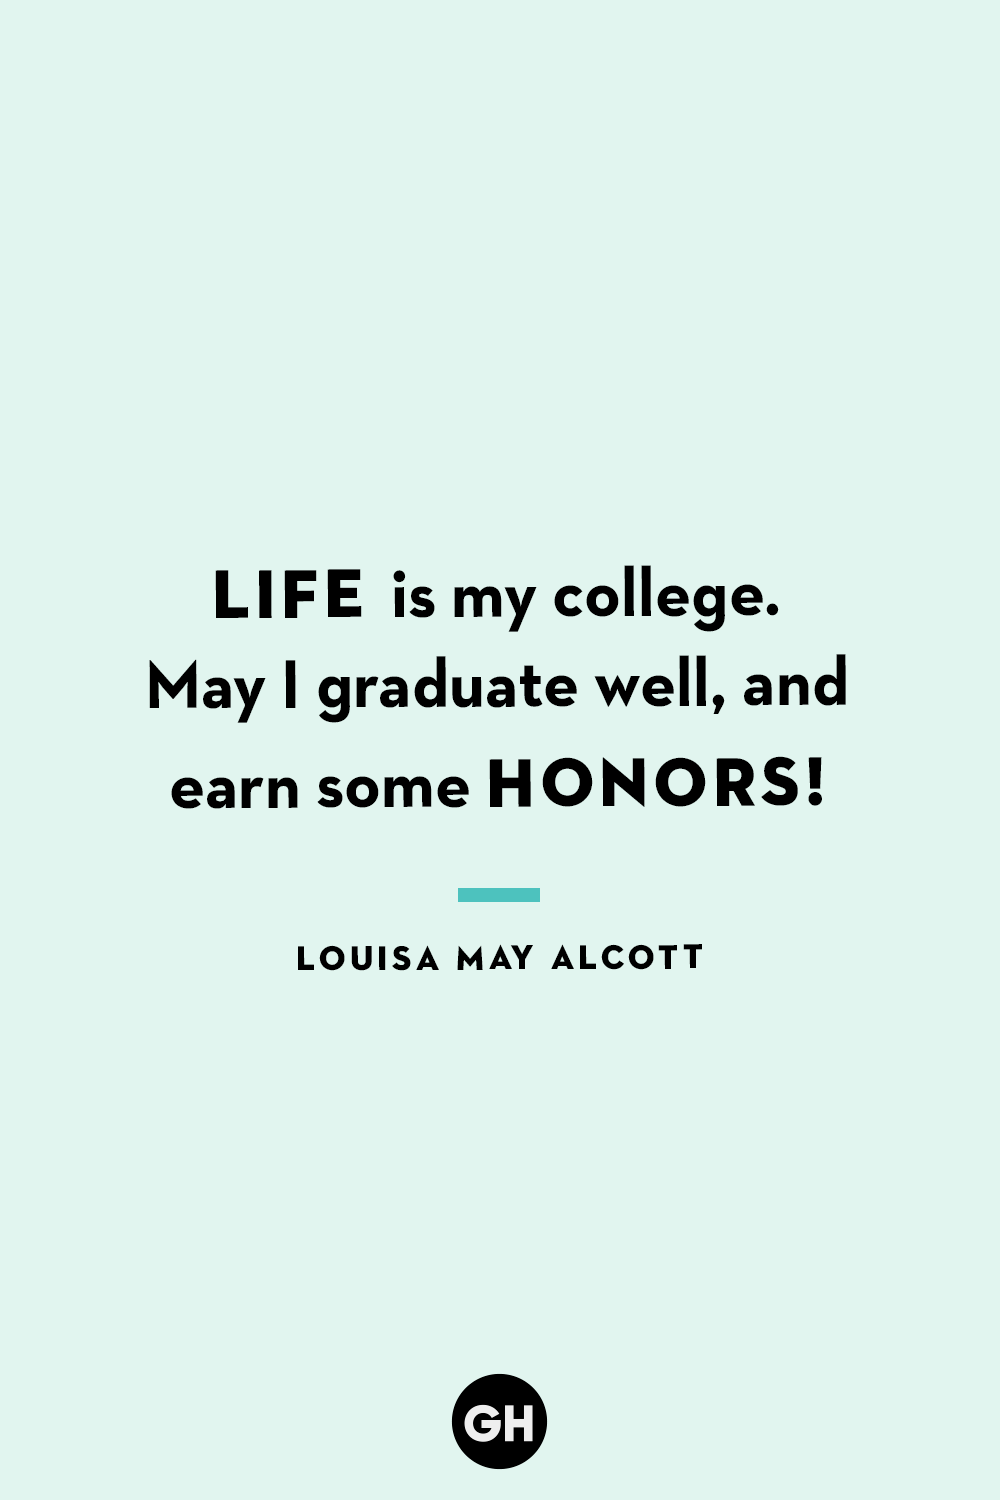 42 Best Funny Graduation Quotes Hilarious Quotes About Graduation Day